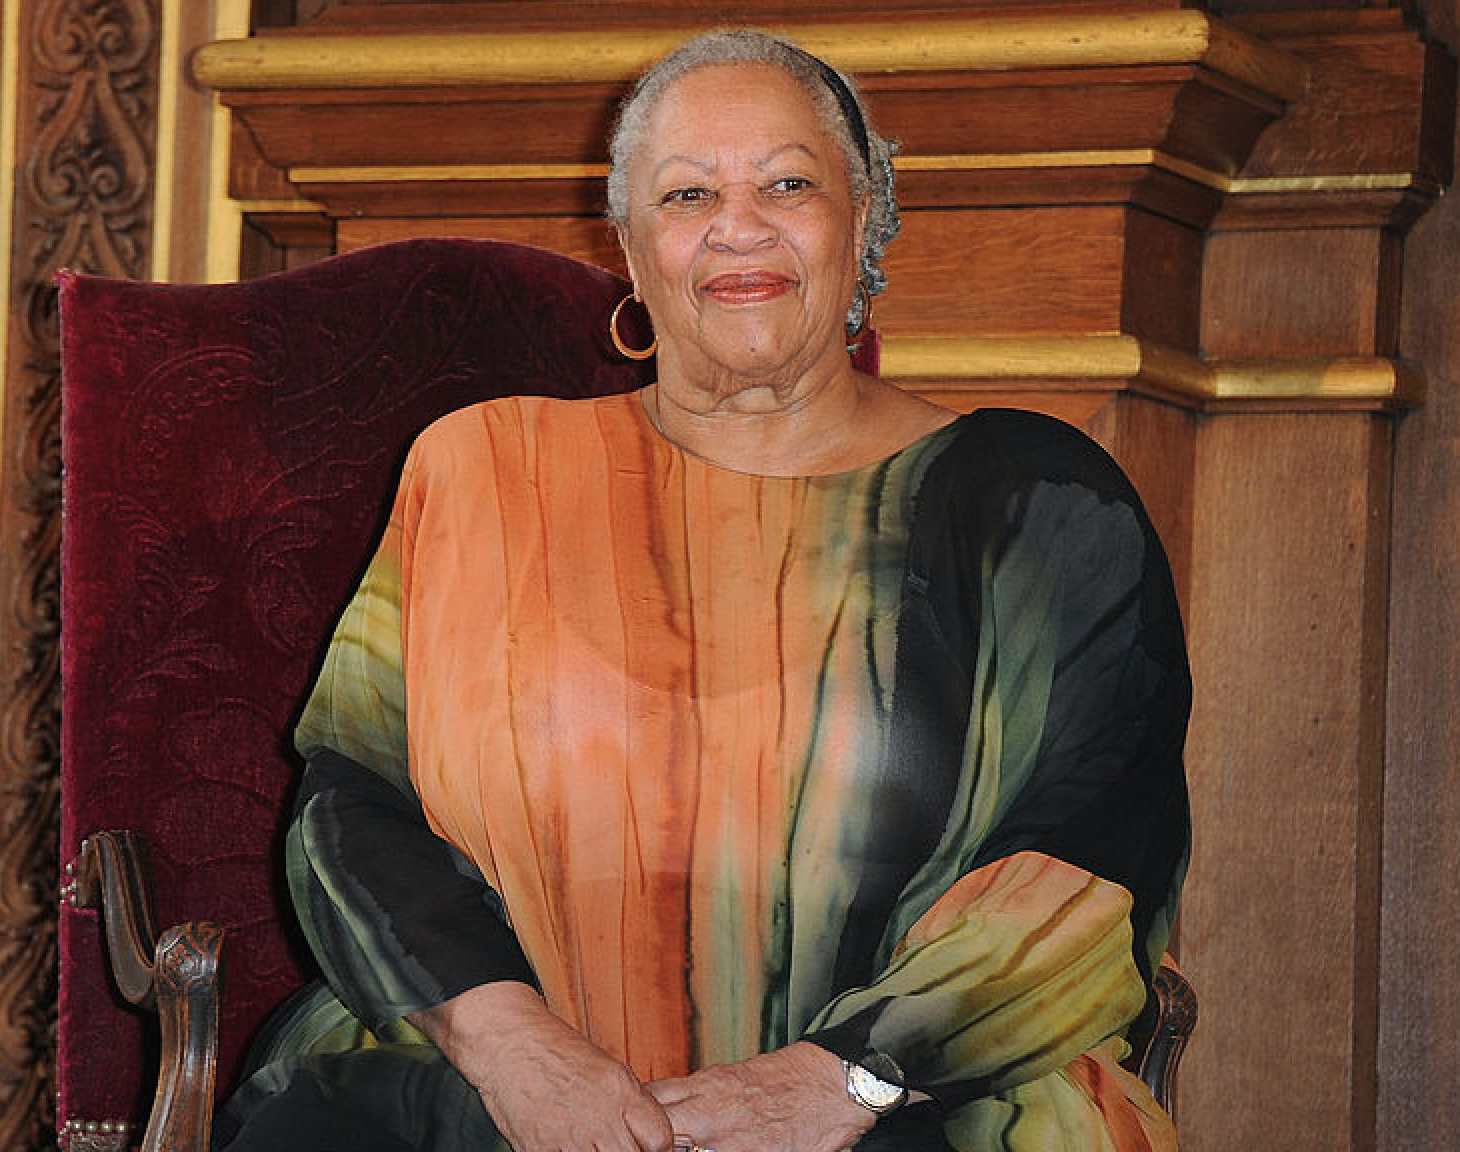 Toni Morrison Taught You to Want More